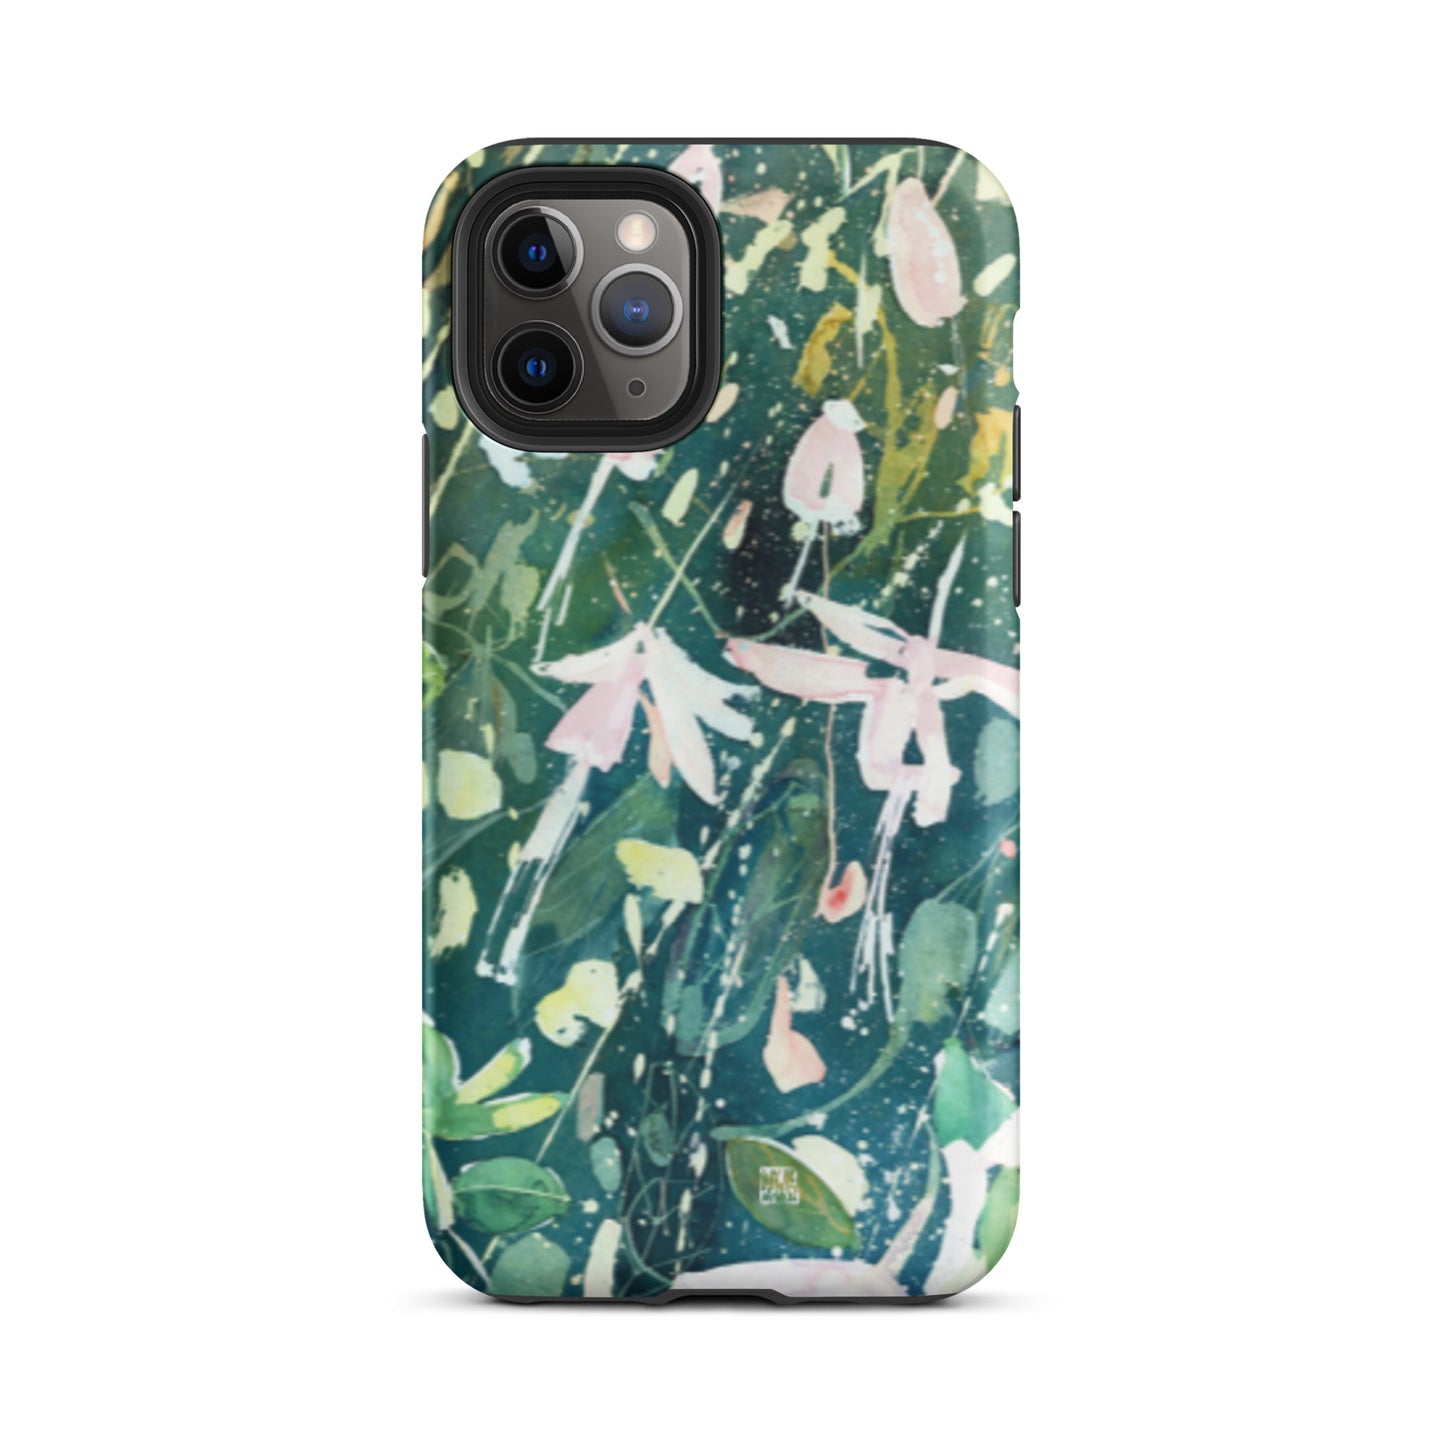 Tough iPhone Art Case - A Moment of Flowers